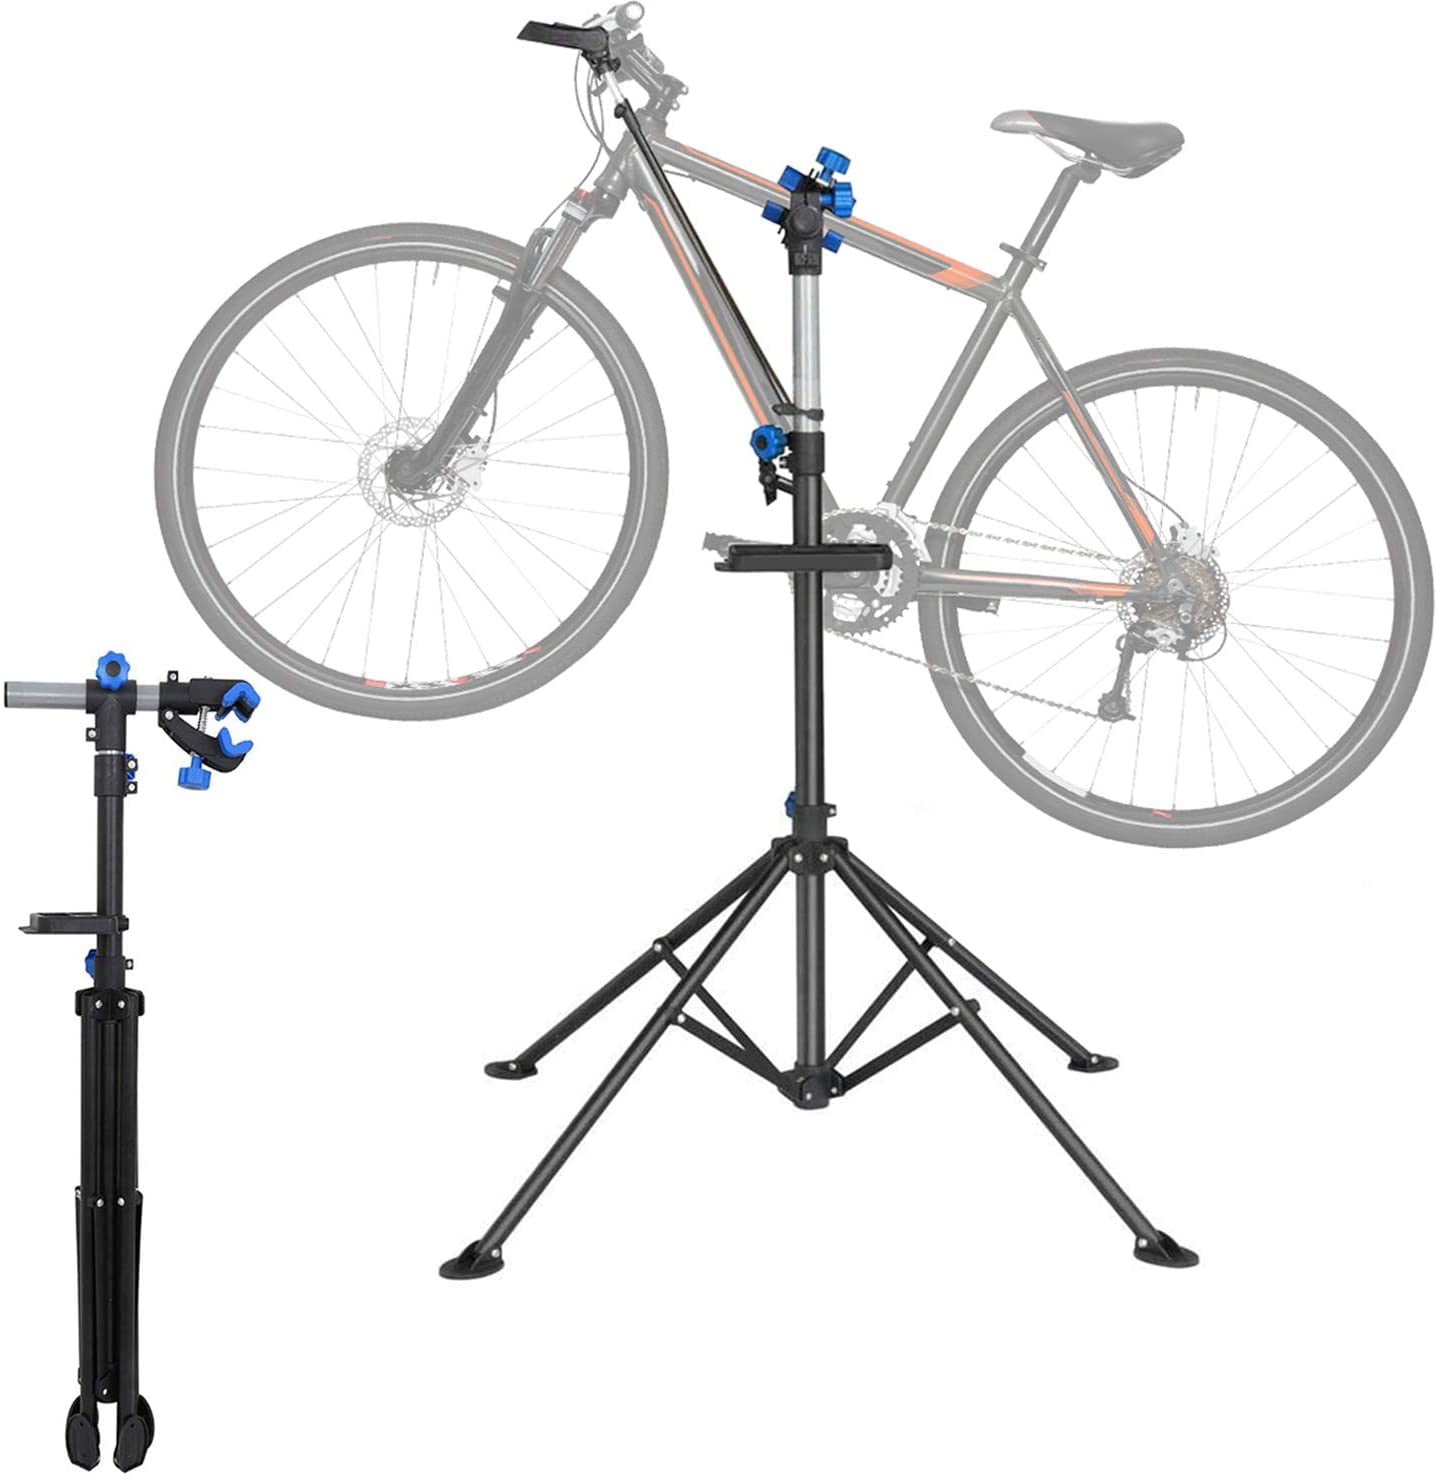 foldable with practical tool tray TecTake Home mechanic bicycle cycle repair work stand mountain bike workstand